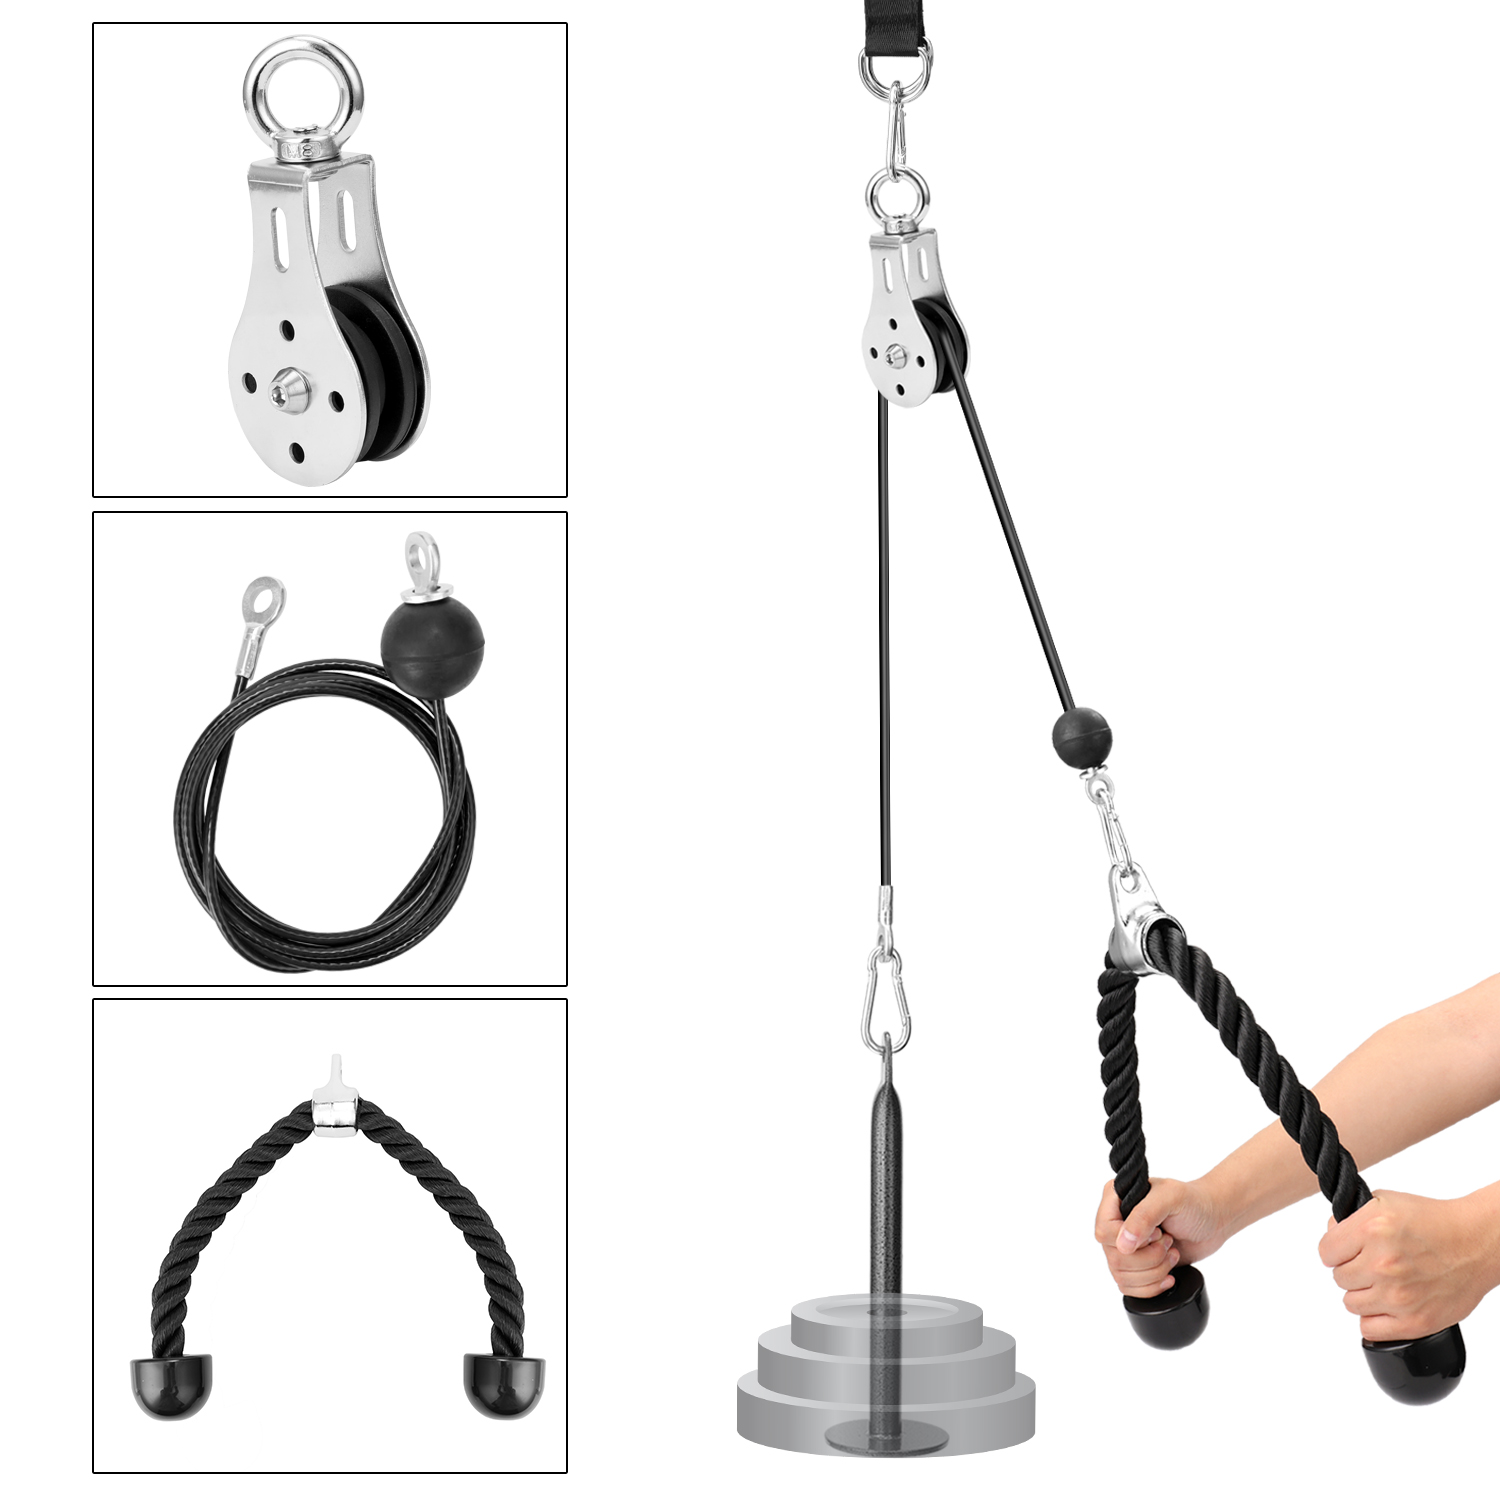 Fitness DIY Pulley Cable Machine Attachment System by Lixada is inexpensive yet functionally good home pulley system